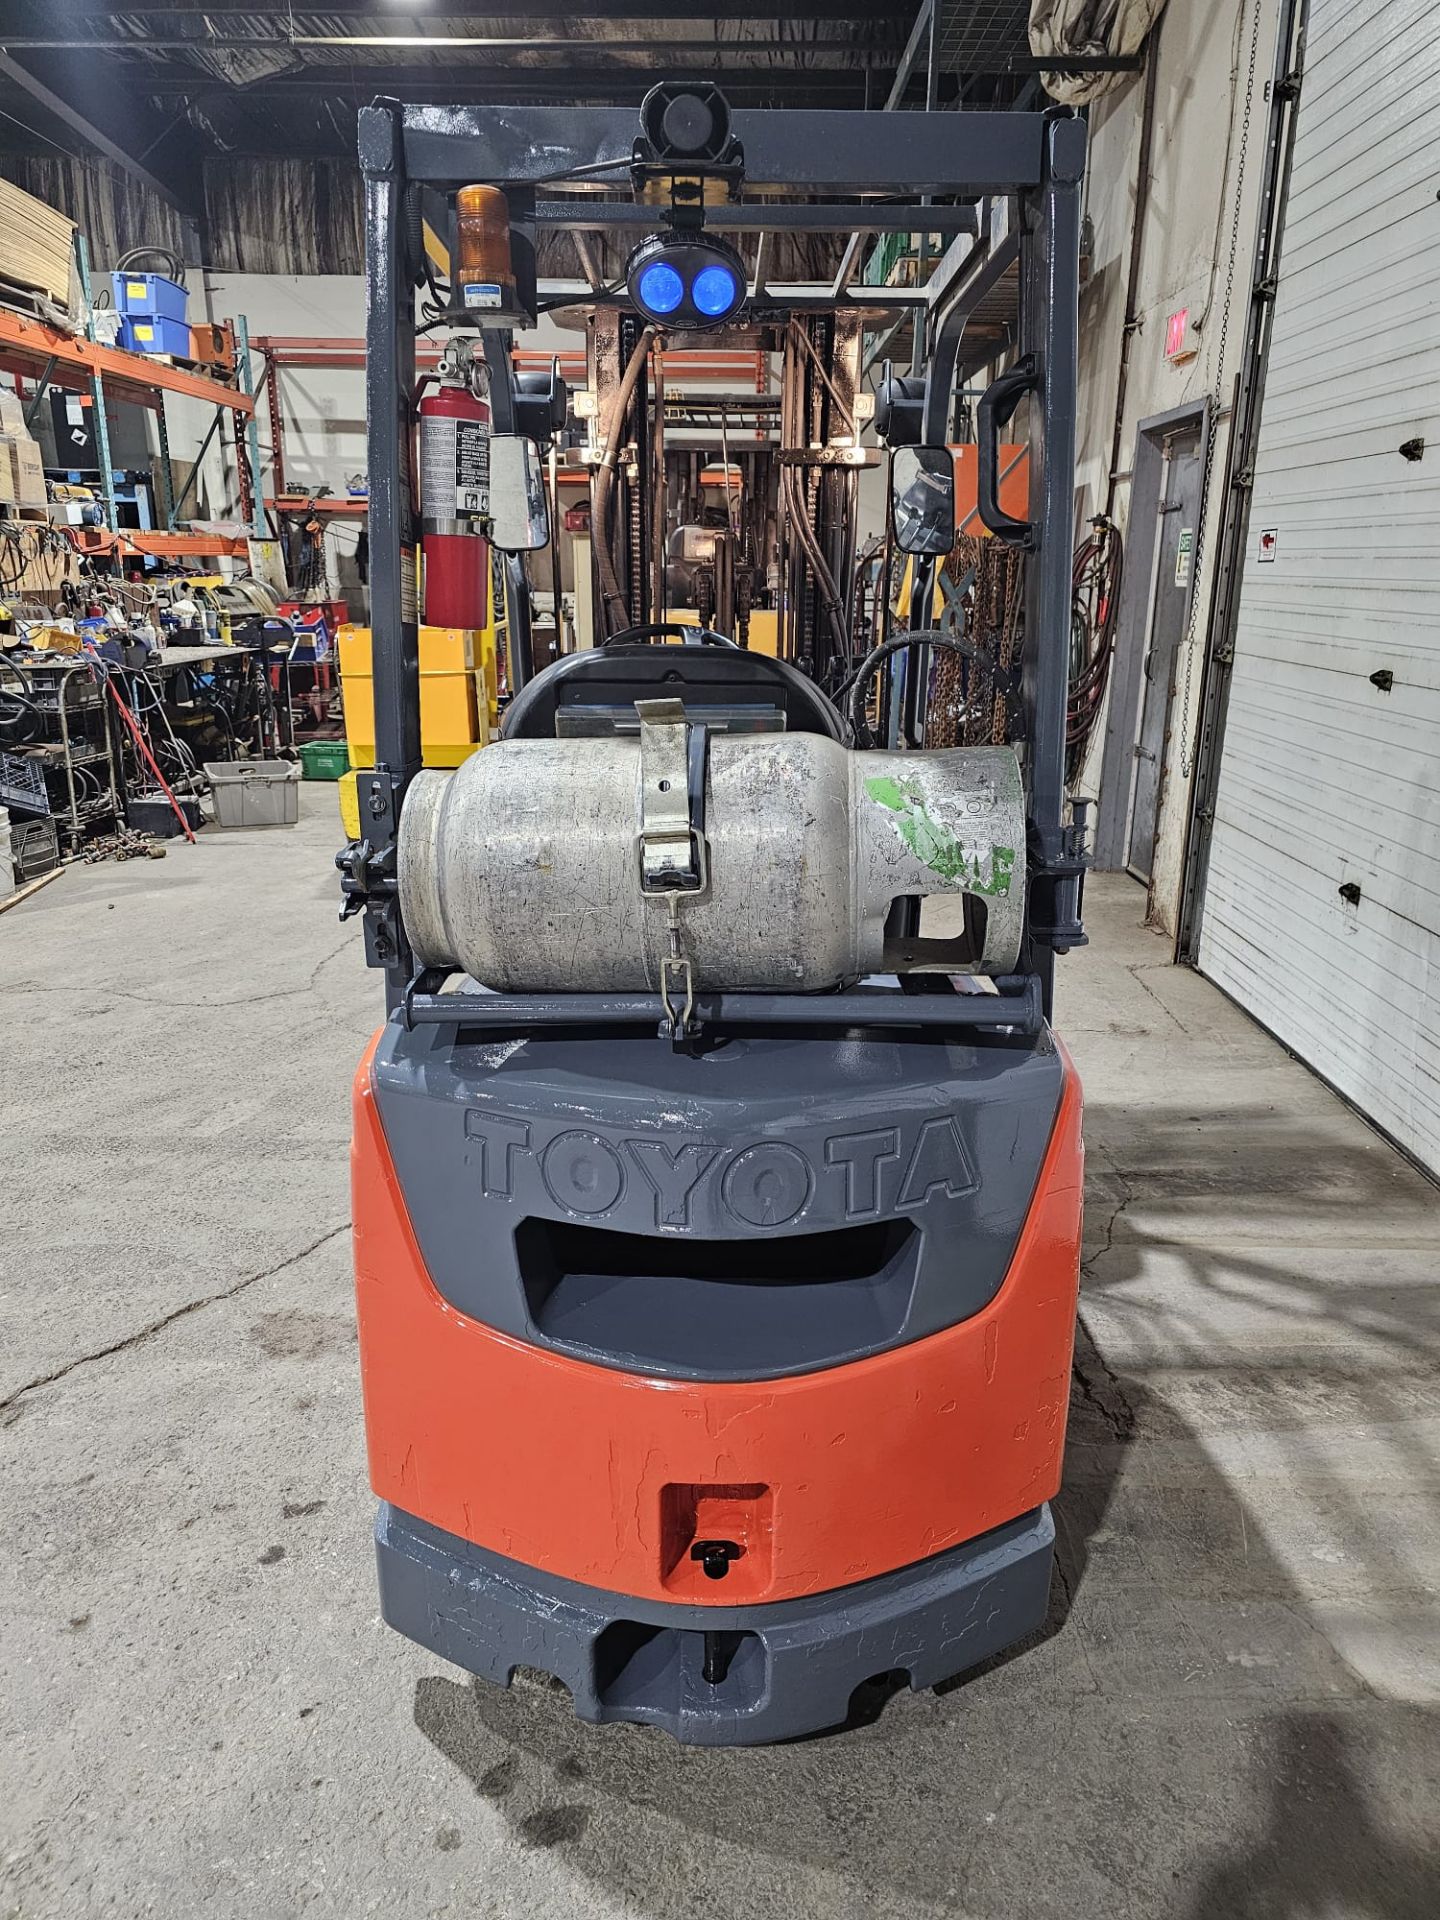 2016 TOYOTA 3,000lbs Capacity LPG (Propane) Forklift with sideshift and 3-STAGE MAST & Non marking - Image 5 of 7